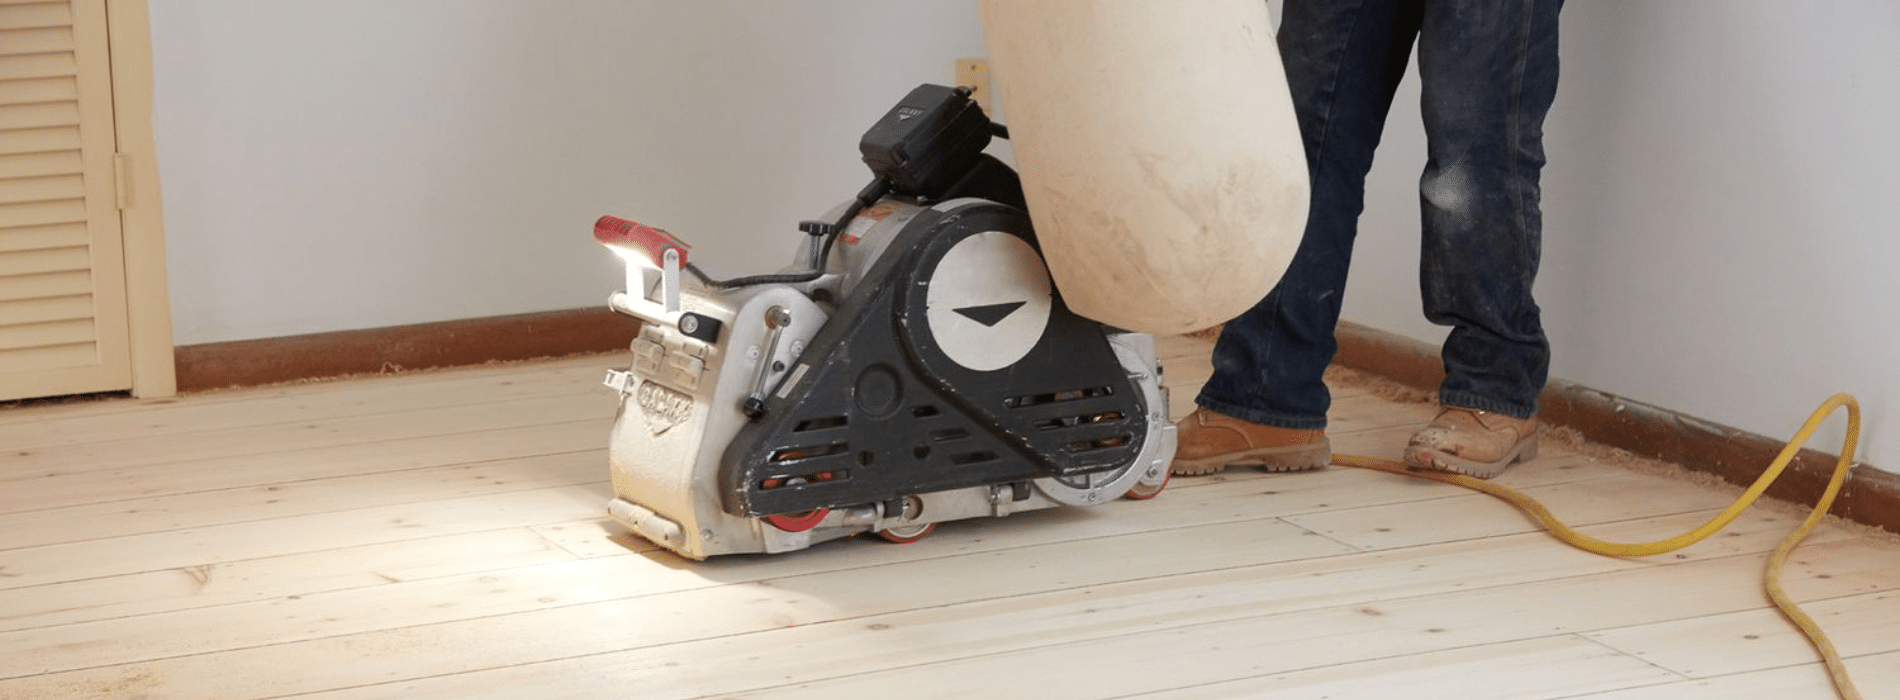 Mr Sander® using a Bona Scorpion, a 200mm drum sander, are sanding a parquet floor in Upper Holloway, N19. With 1.5kW power, 240V voltage, and 50Hz frequency, they ensure clean and efficient results. The sander is connected to a dust extraction system equipped with a HEPA filter.